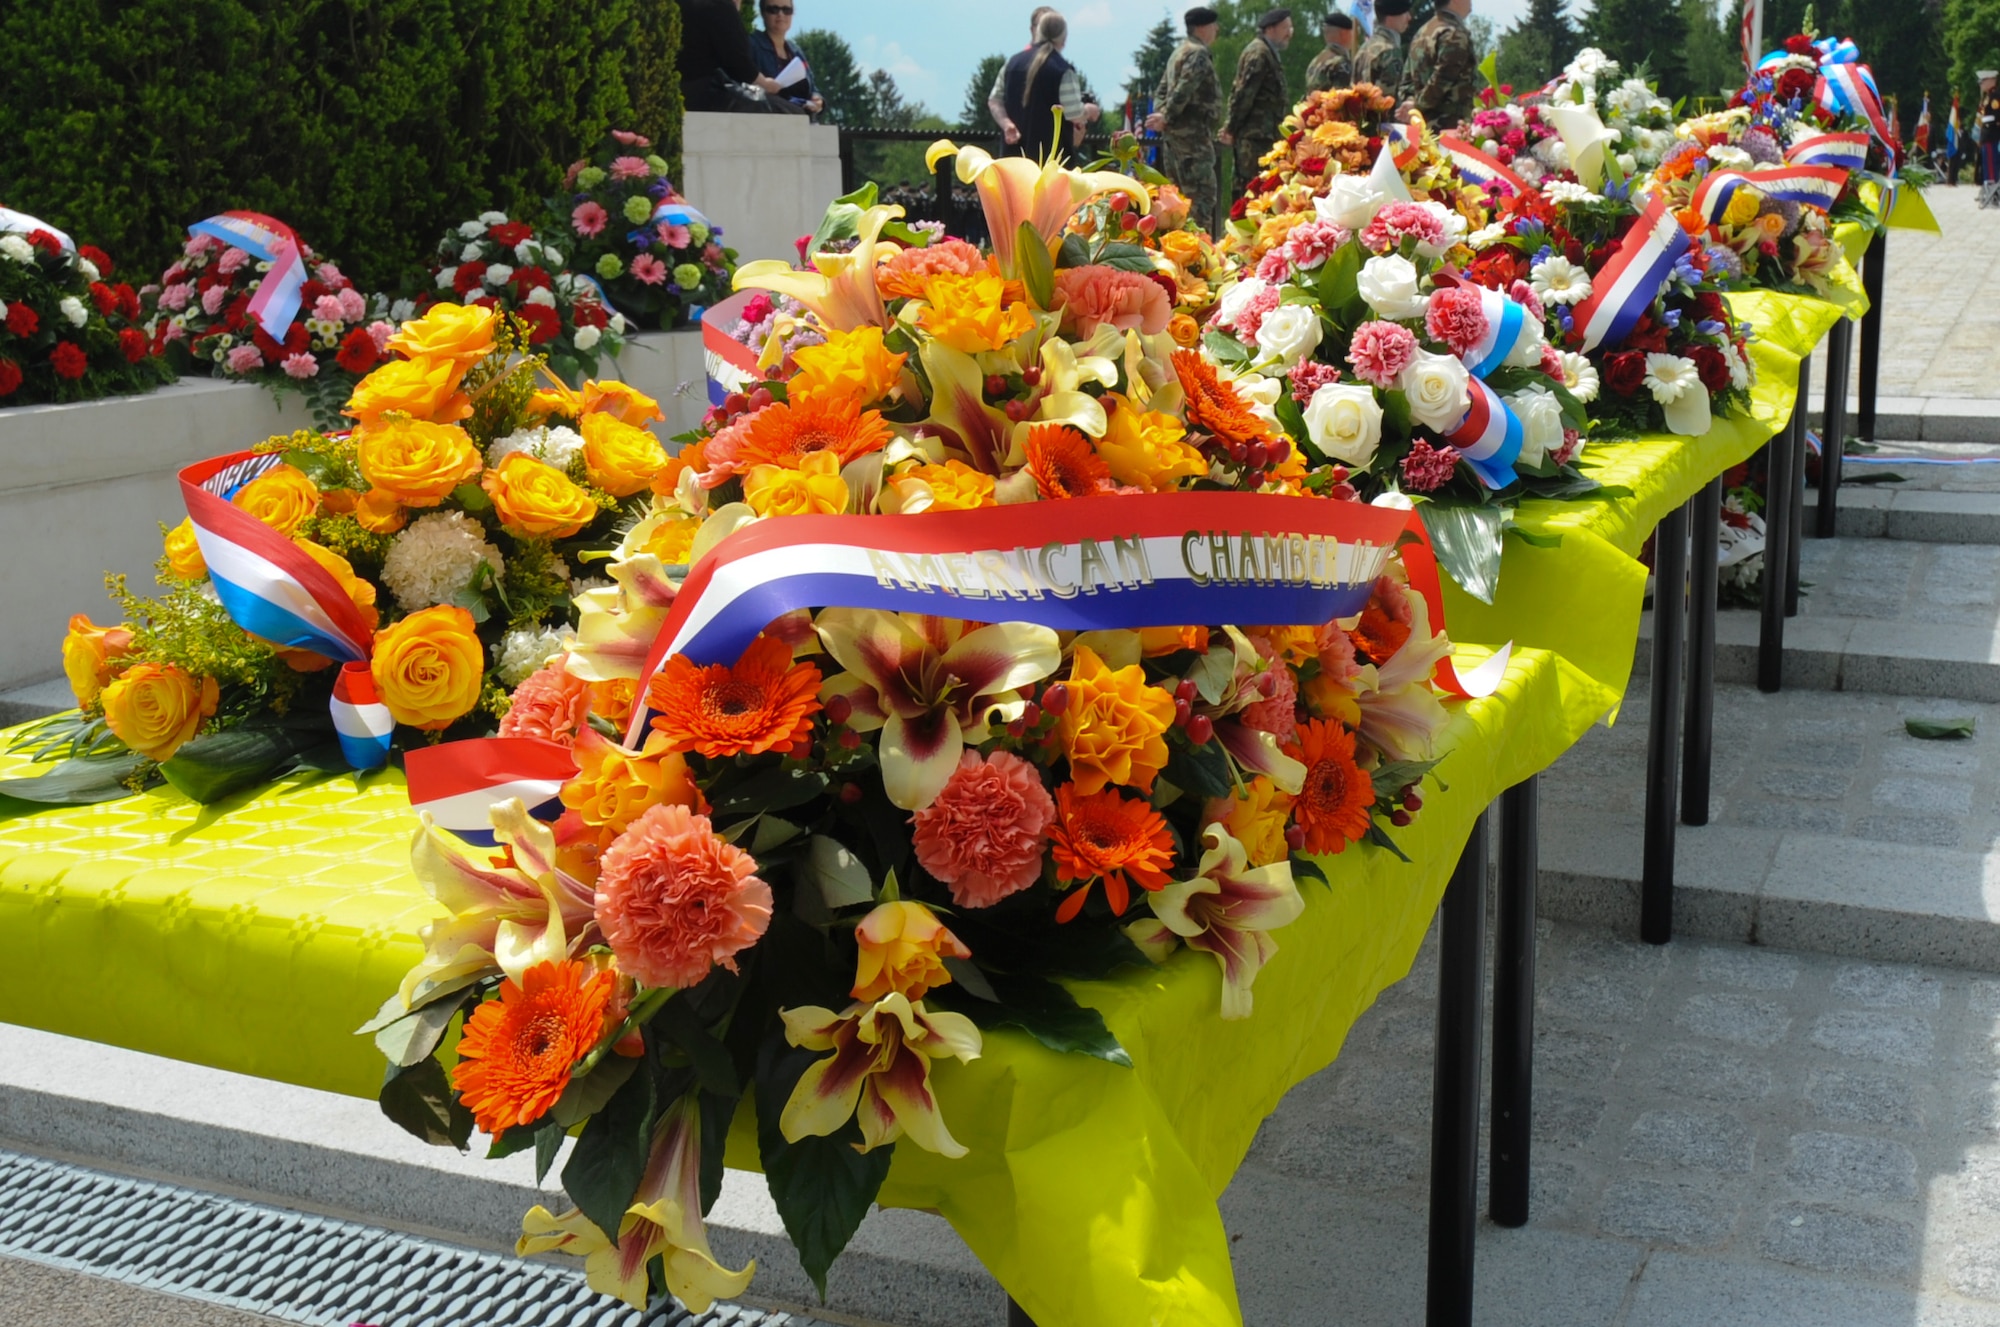 A collection of wreaths lay on a table before a Memorial Day ceremony at the Luxembourg American Cemetery and Memorial in Luxembourg, May 28, 2016. More than 200 Luxembourgers and Americans gathered at the cemetery to reflect on the sacrifices made by fallen U.S. service members. (U.S. Air Force photo by Staff Sgt. Joe W. McFadden/Released)  